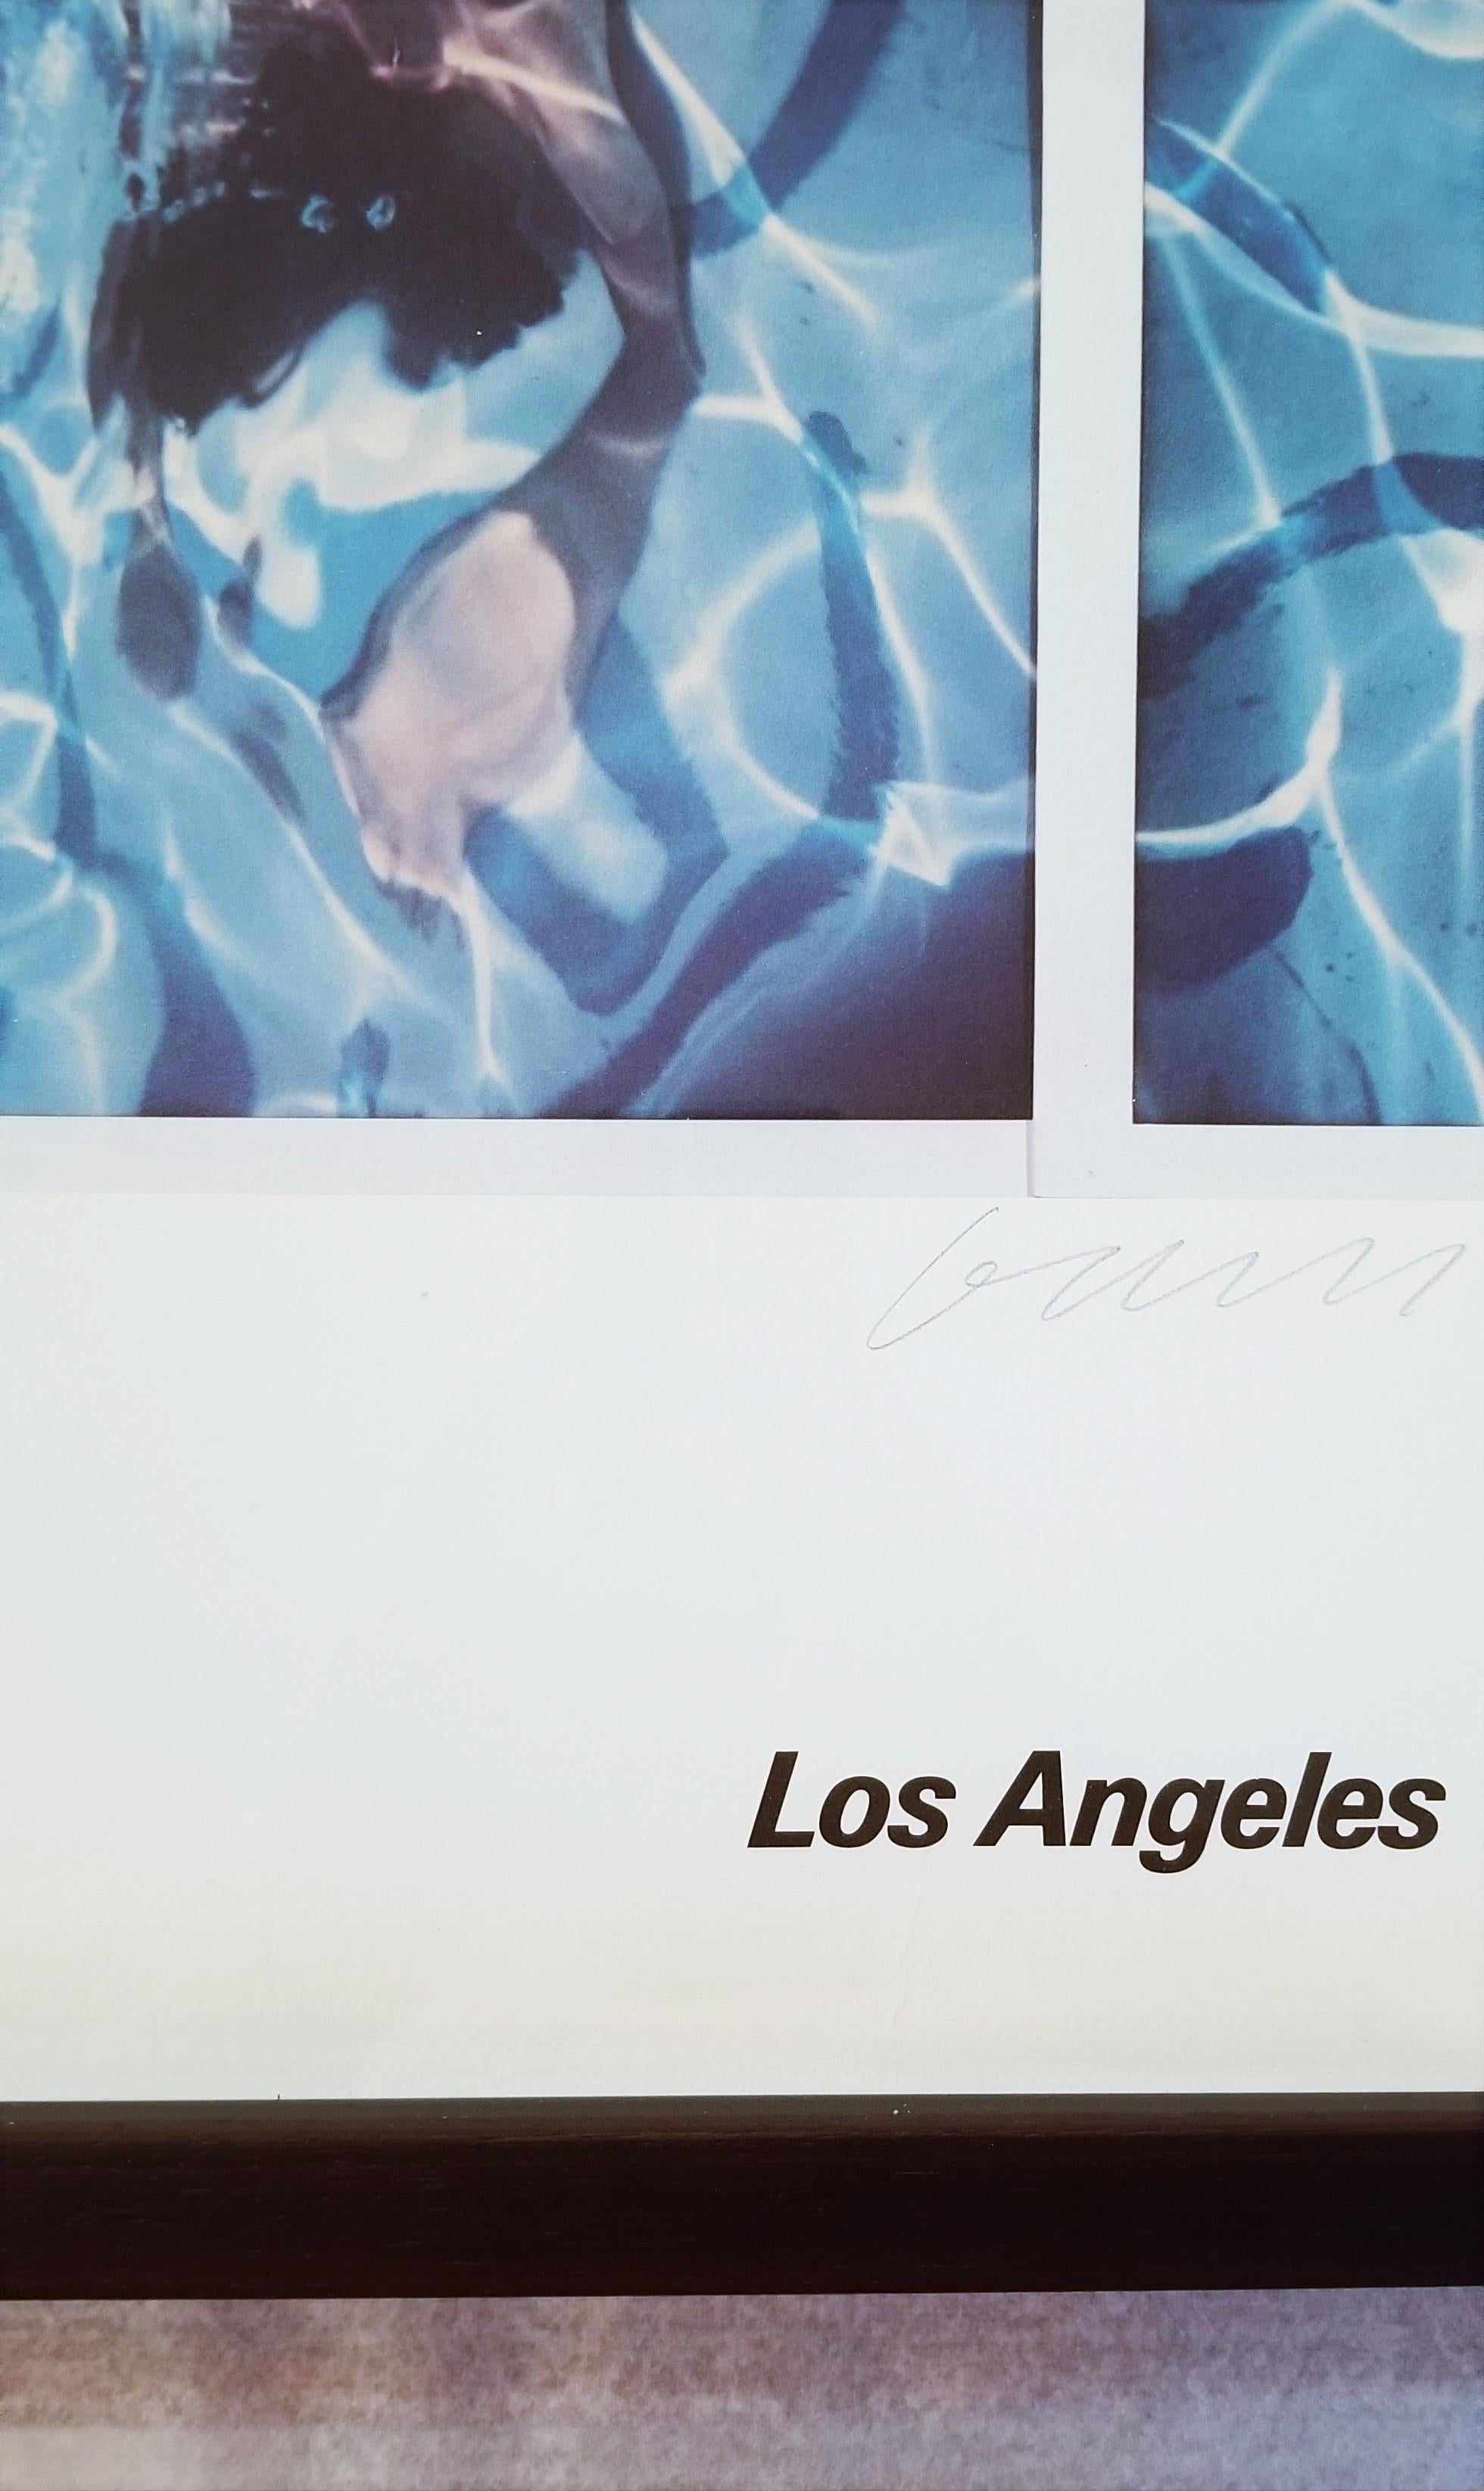 Los Angeles 1984 Olympic Games (Polaroids of Swimmer) Poster (Signed) 2